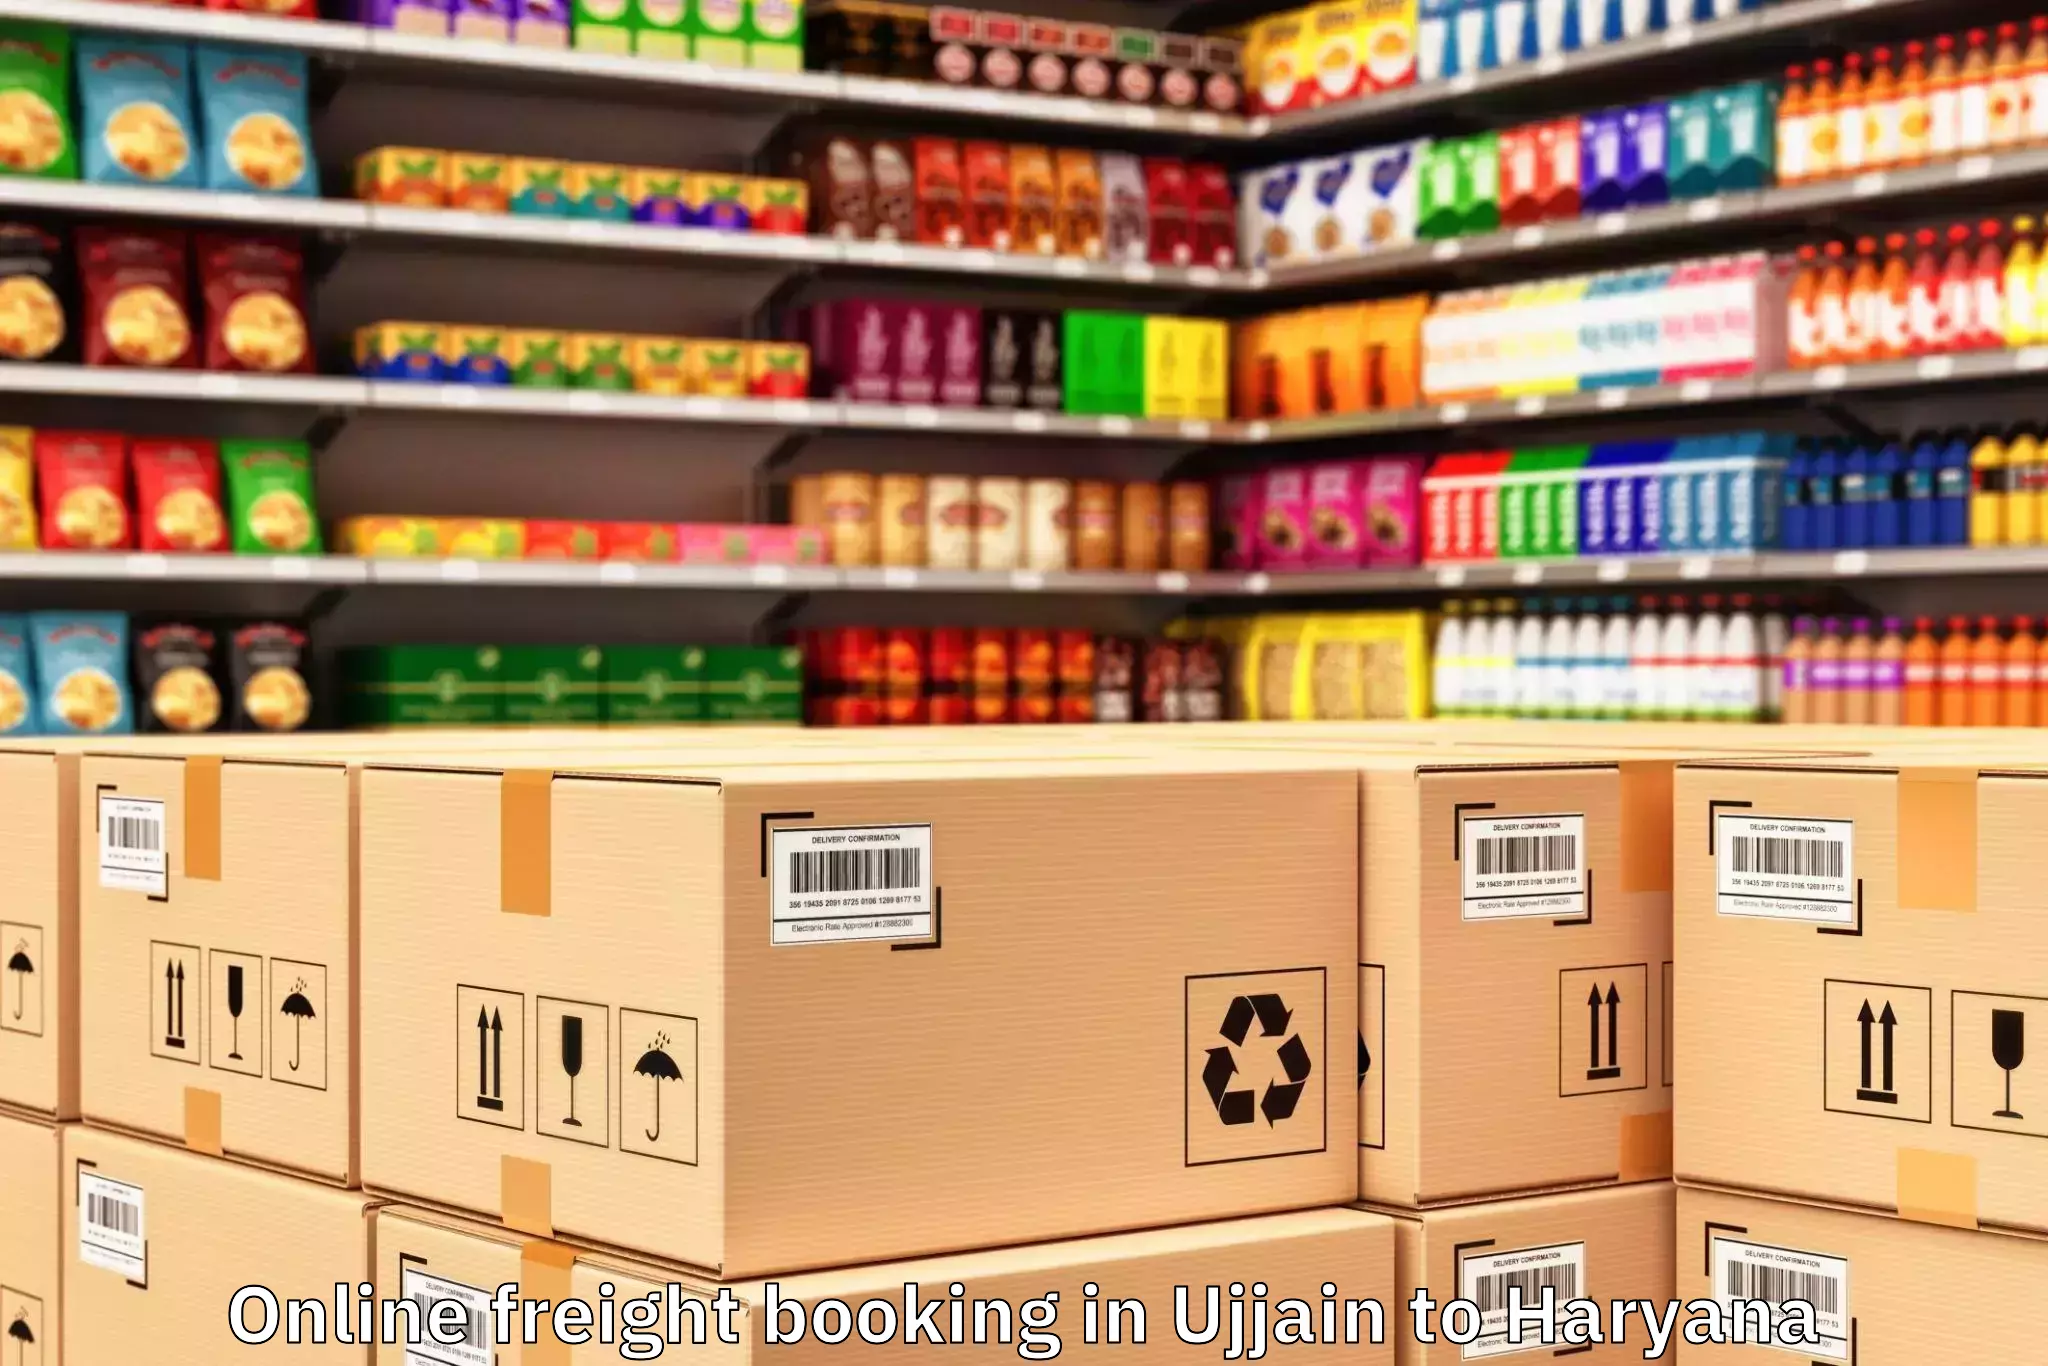 Leading Ujjain to Haryana Online Freight Booking Provider